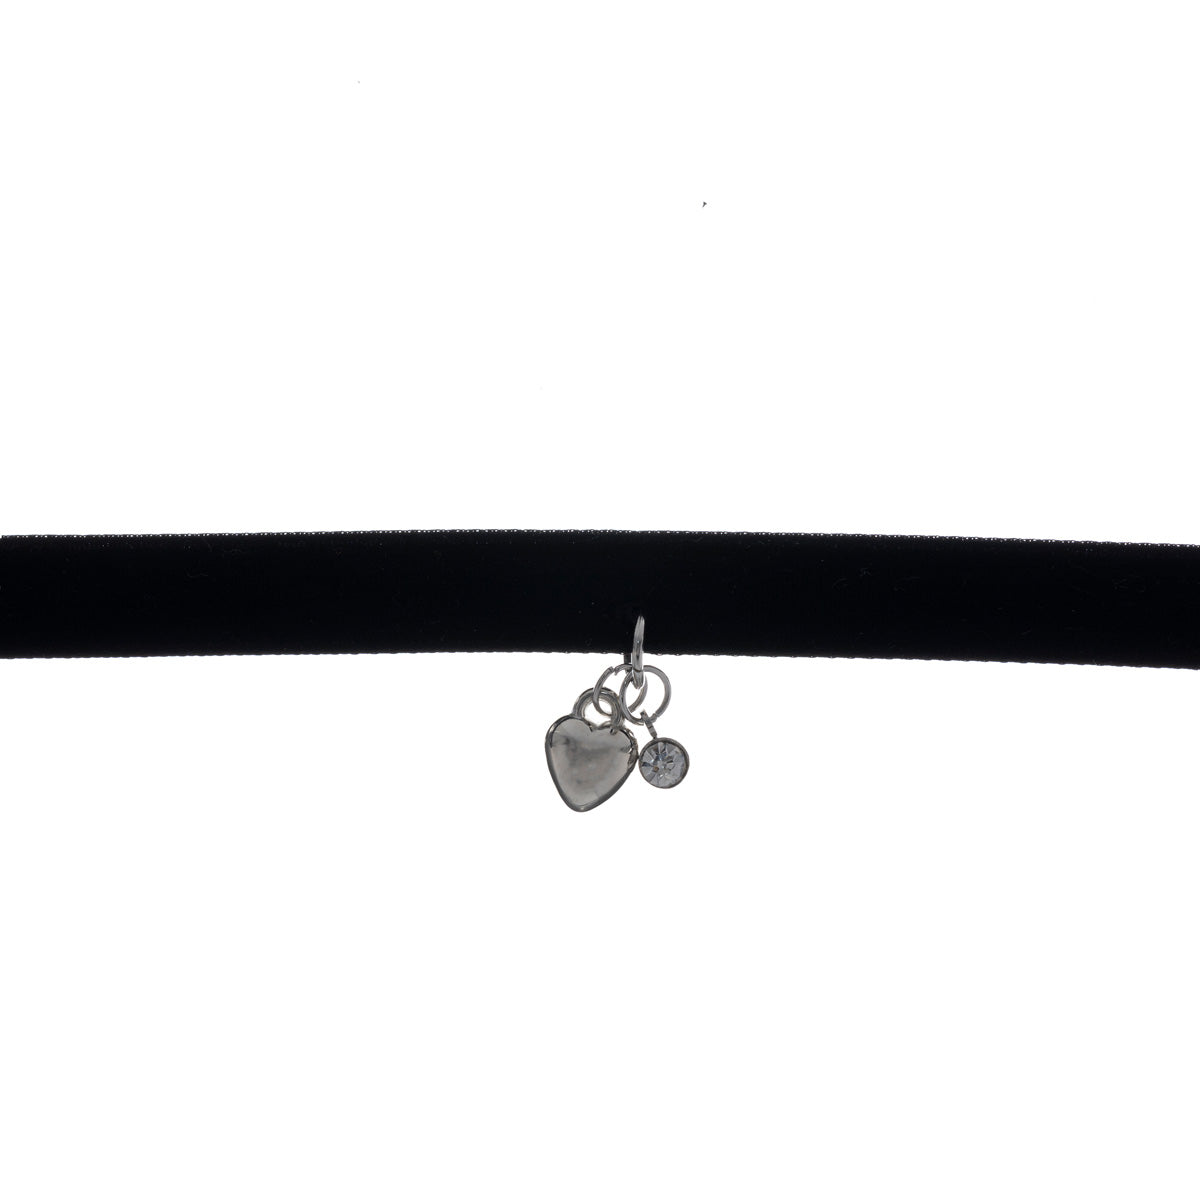 Choker necklace with heart pendant